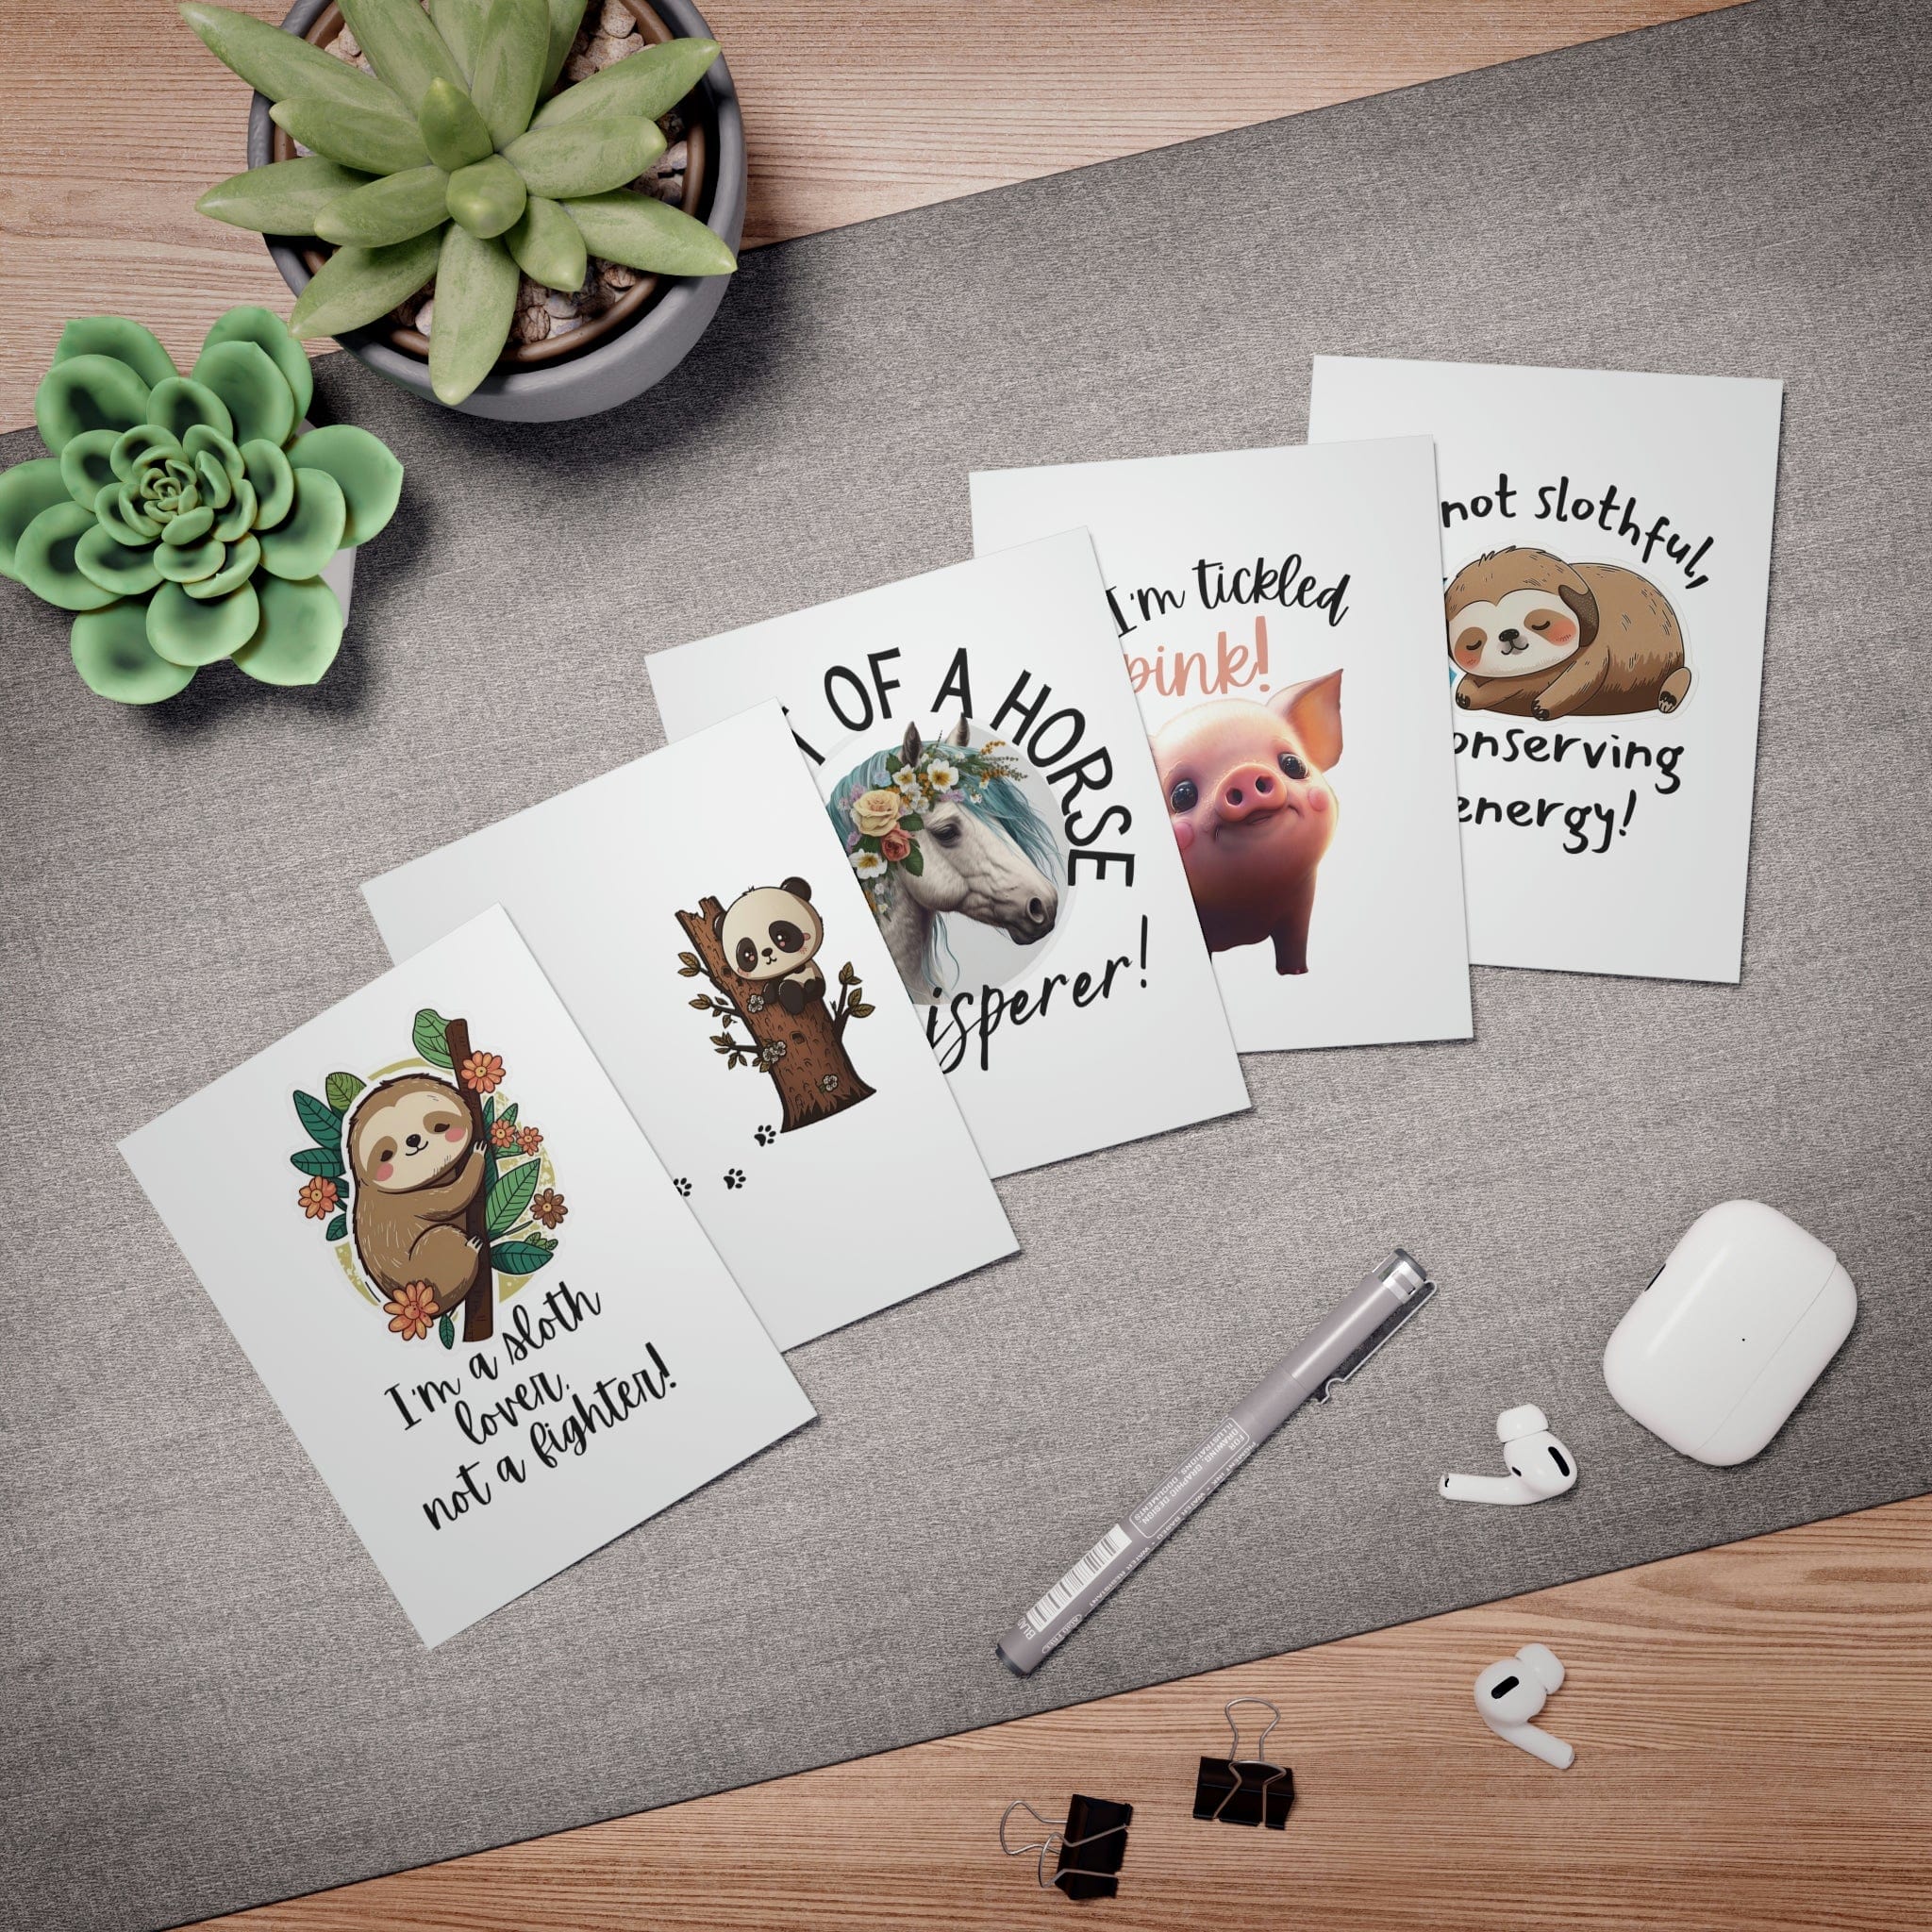 Printify Paper products 4.25" x 5.5" (Vertical) / Uncoated Animal Love Multi-Design Greeting Cards (5-Pack) (Blank Inside)